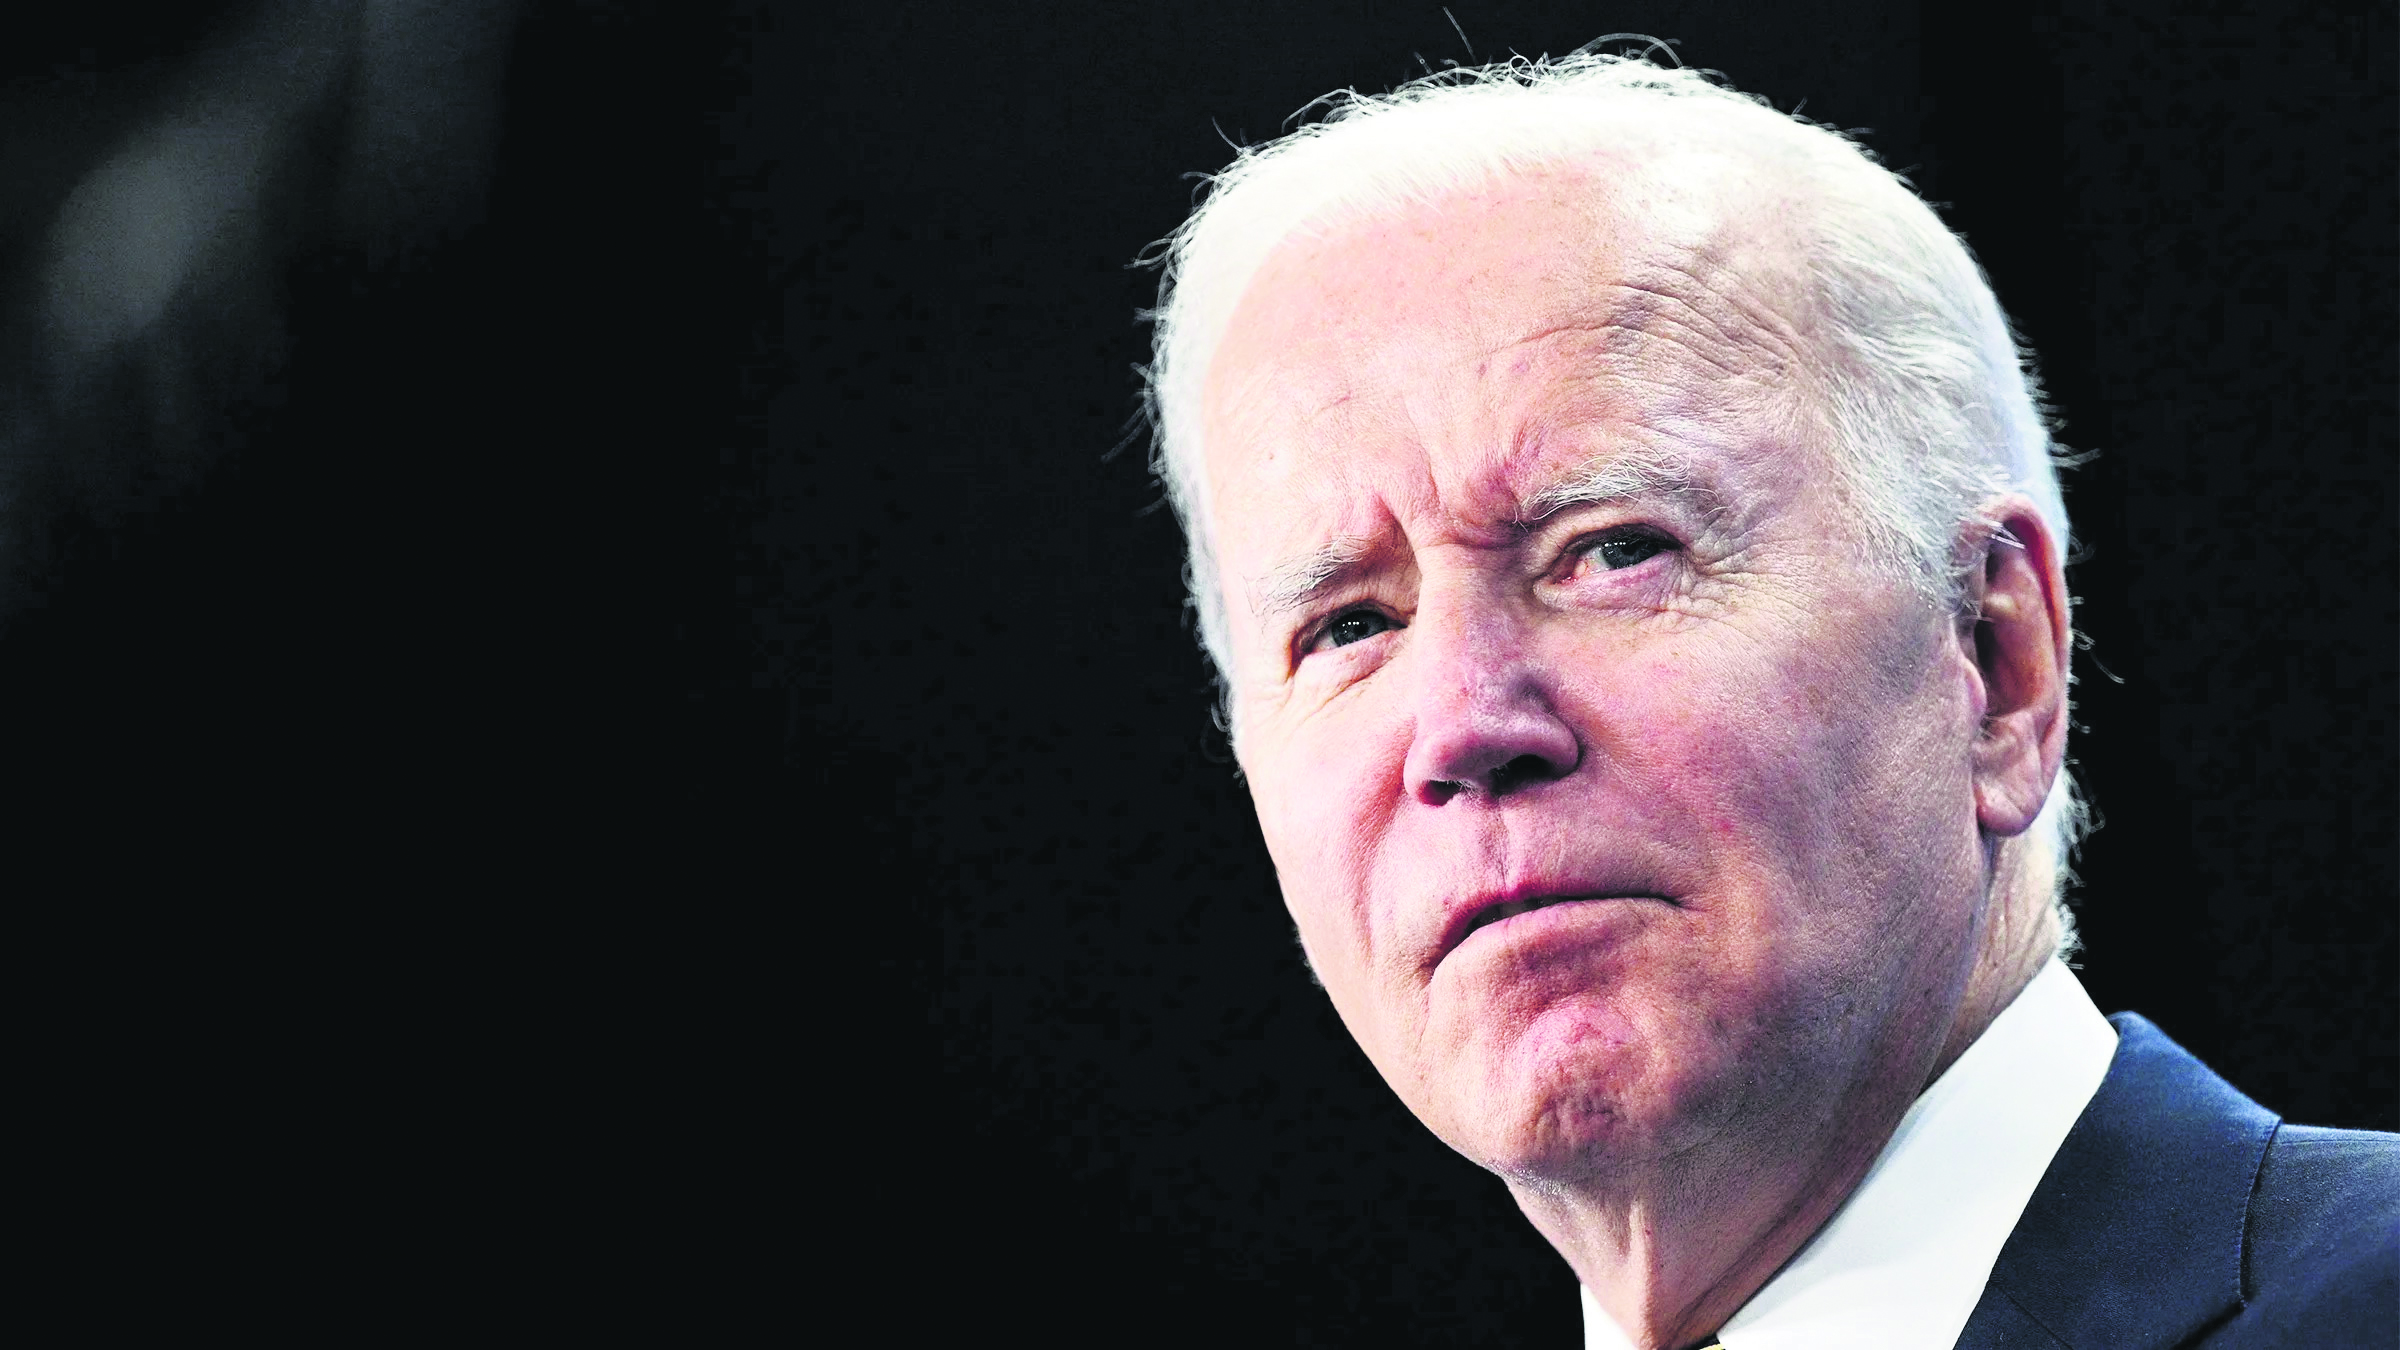 Biden vows to stand up against Russia, China